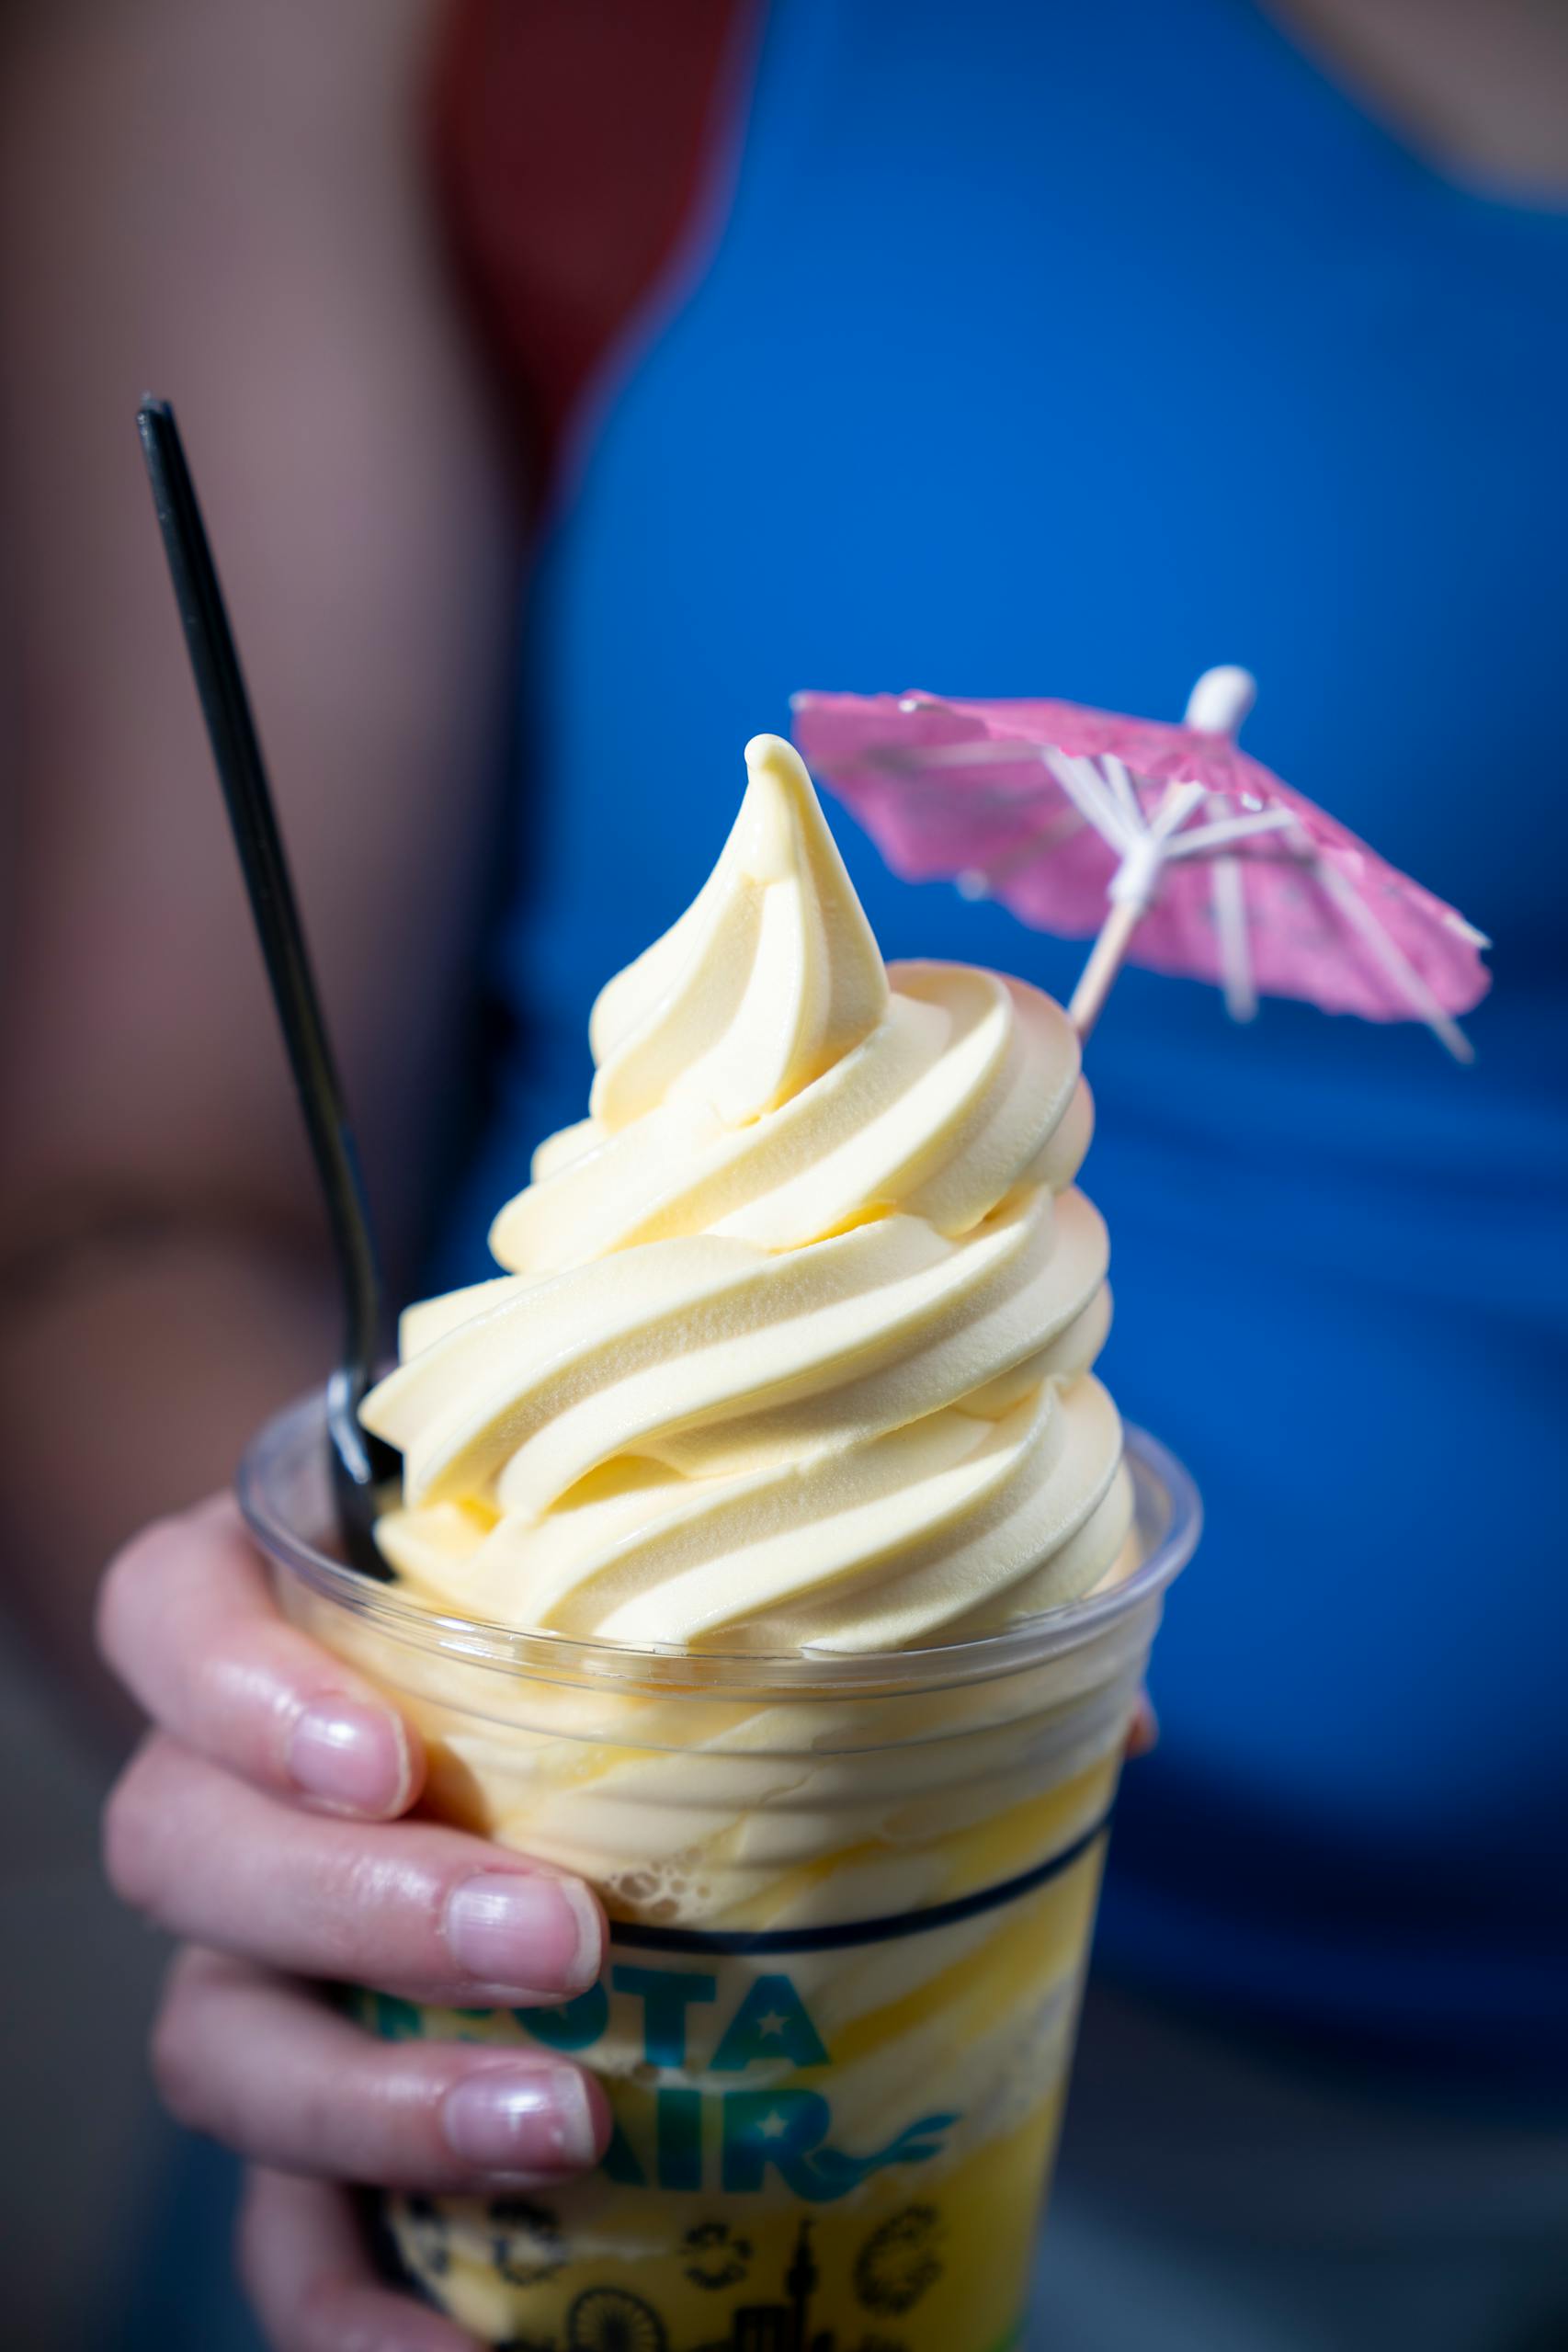 Dole Soft Serve from Tasti Whip. The new foods of the 2023 Minnesota State Fair photographed on the first day of the fair in Falcon Heights, Minn. on Tuesday, Aug. 8, 2023. ] LEILA NAVIDI • leila.navidi@startribune.com